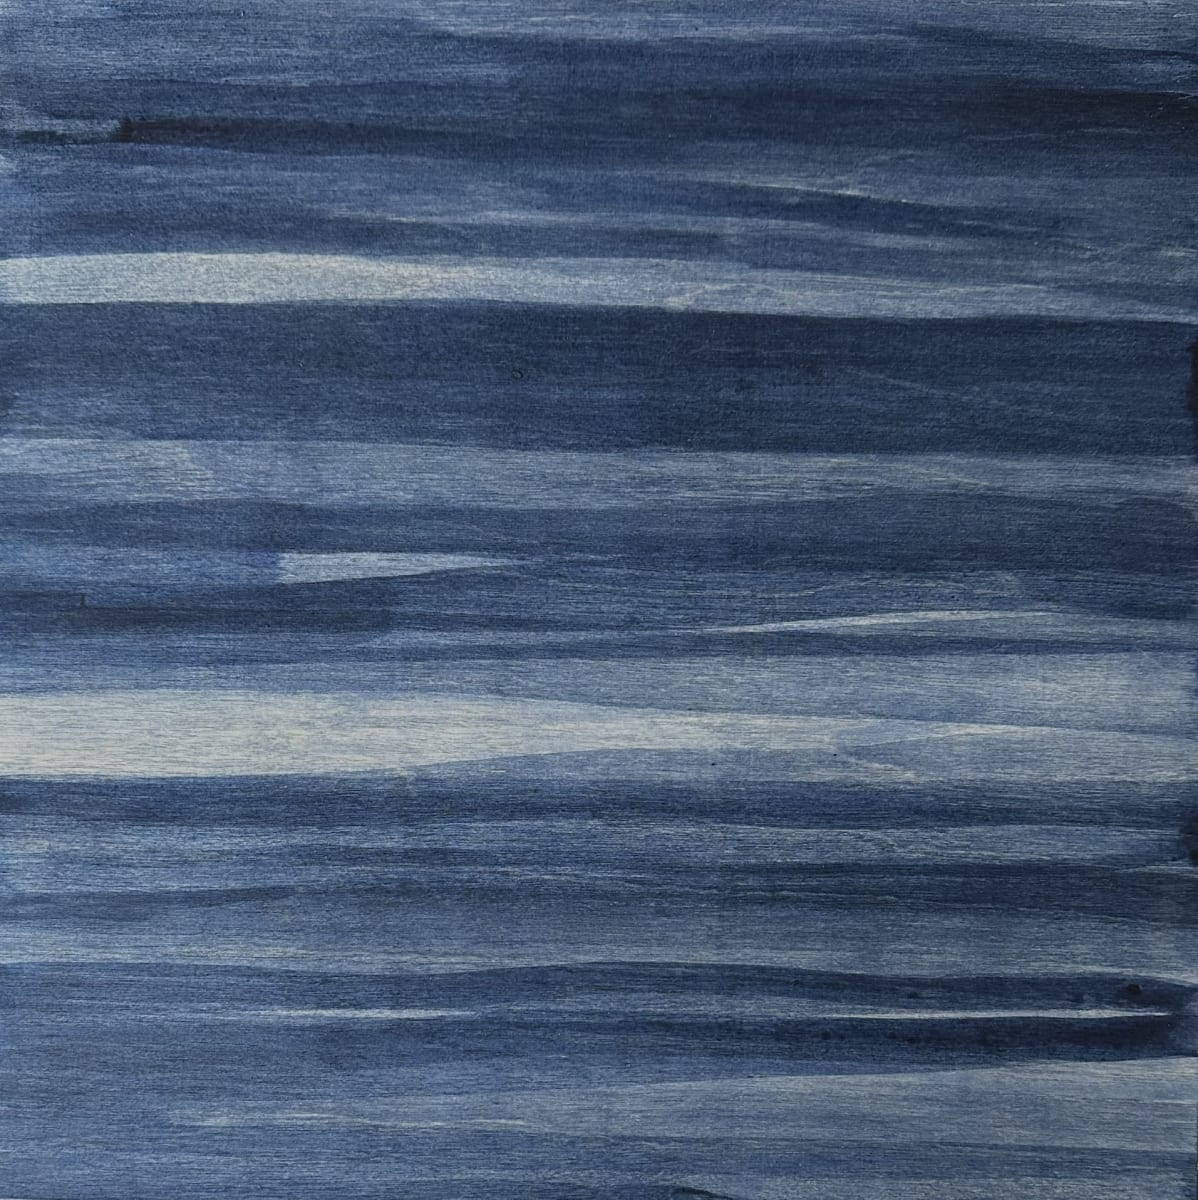 Study in Blue by Courtney Cotton  Image: Oceanic